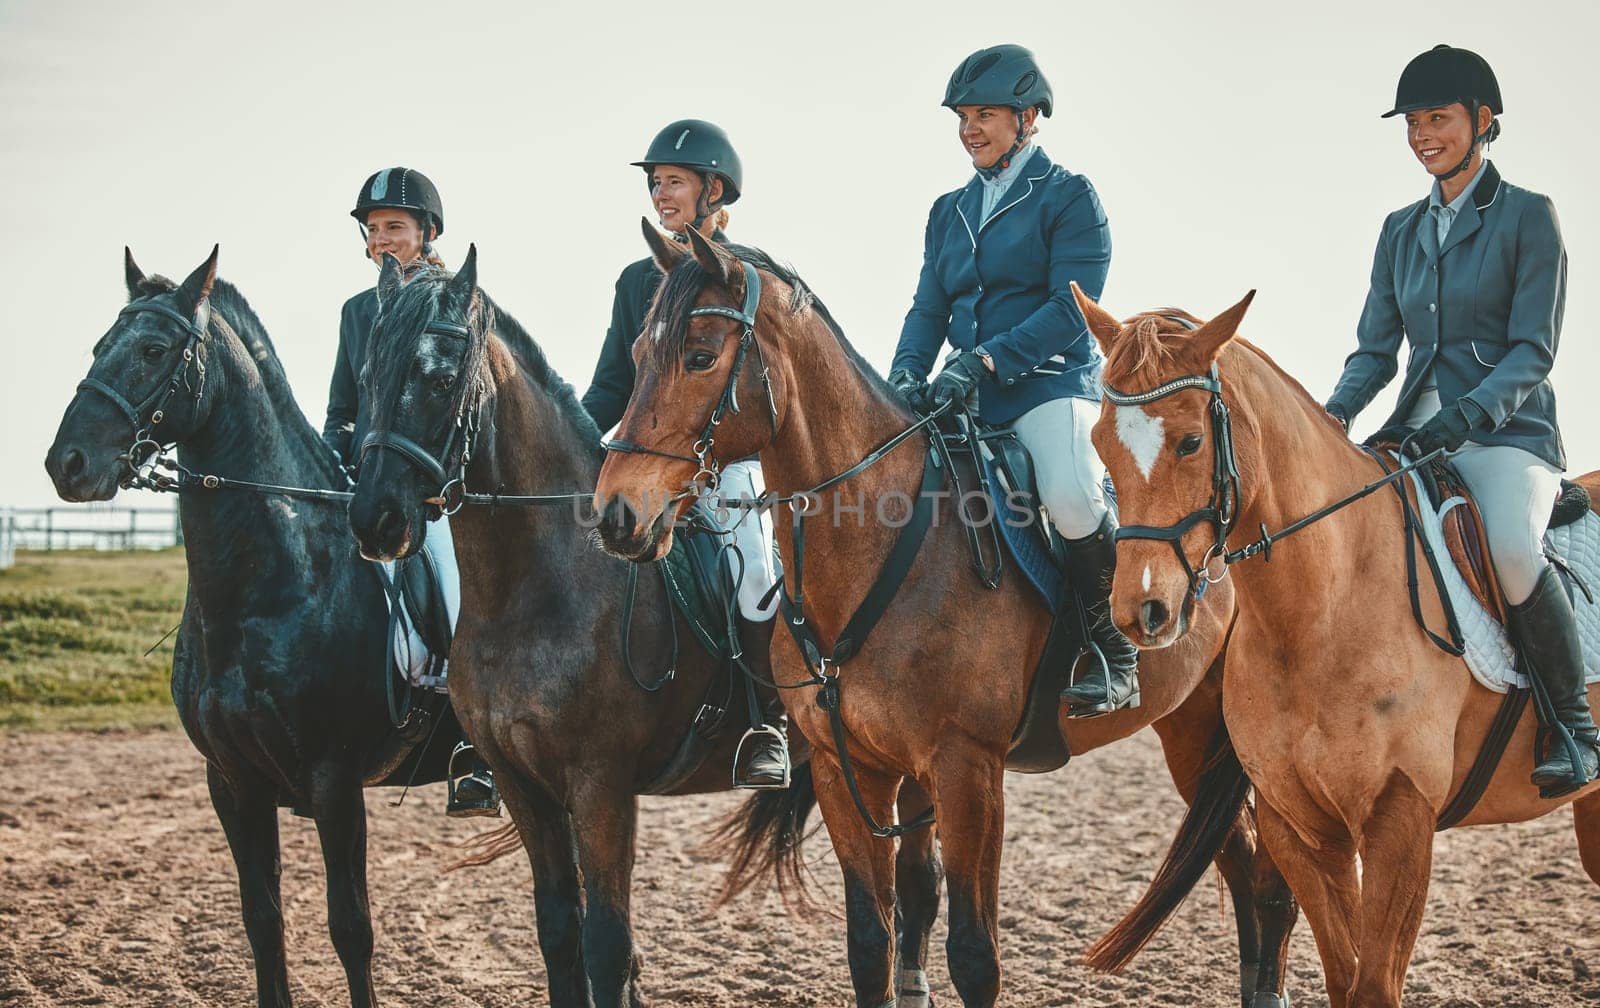 Equestrian, horse riding group and sport, women outdoor in countryside with rider or jockey, recreation and lifestyle. Animal, sports and fitness with athlete, competition with healthy hobby.